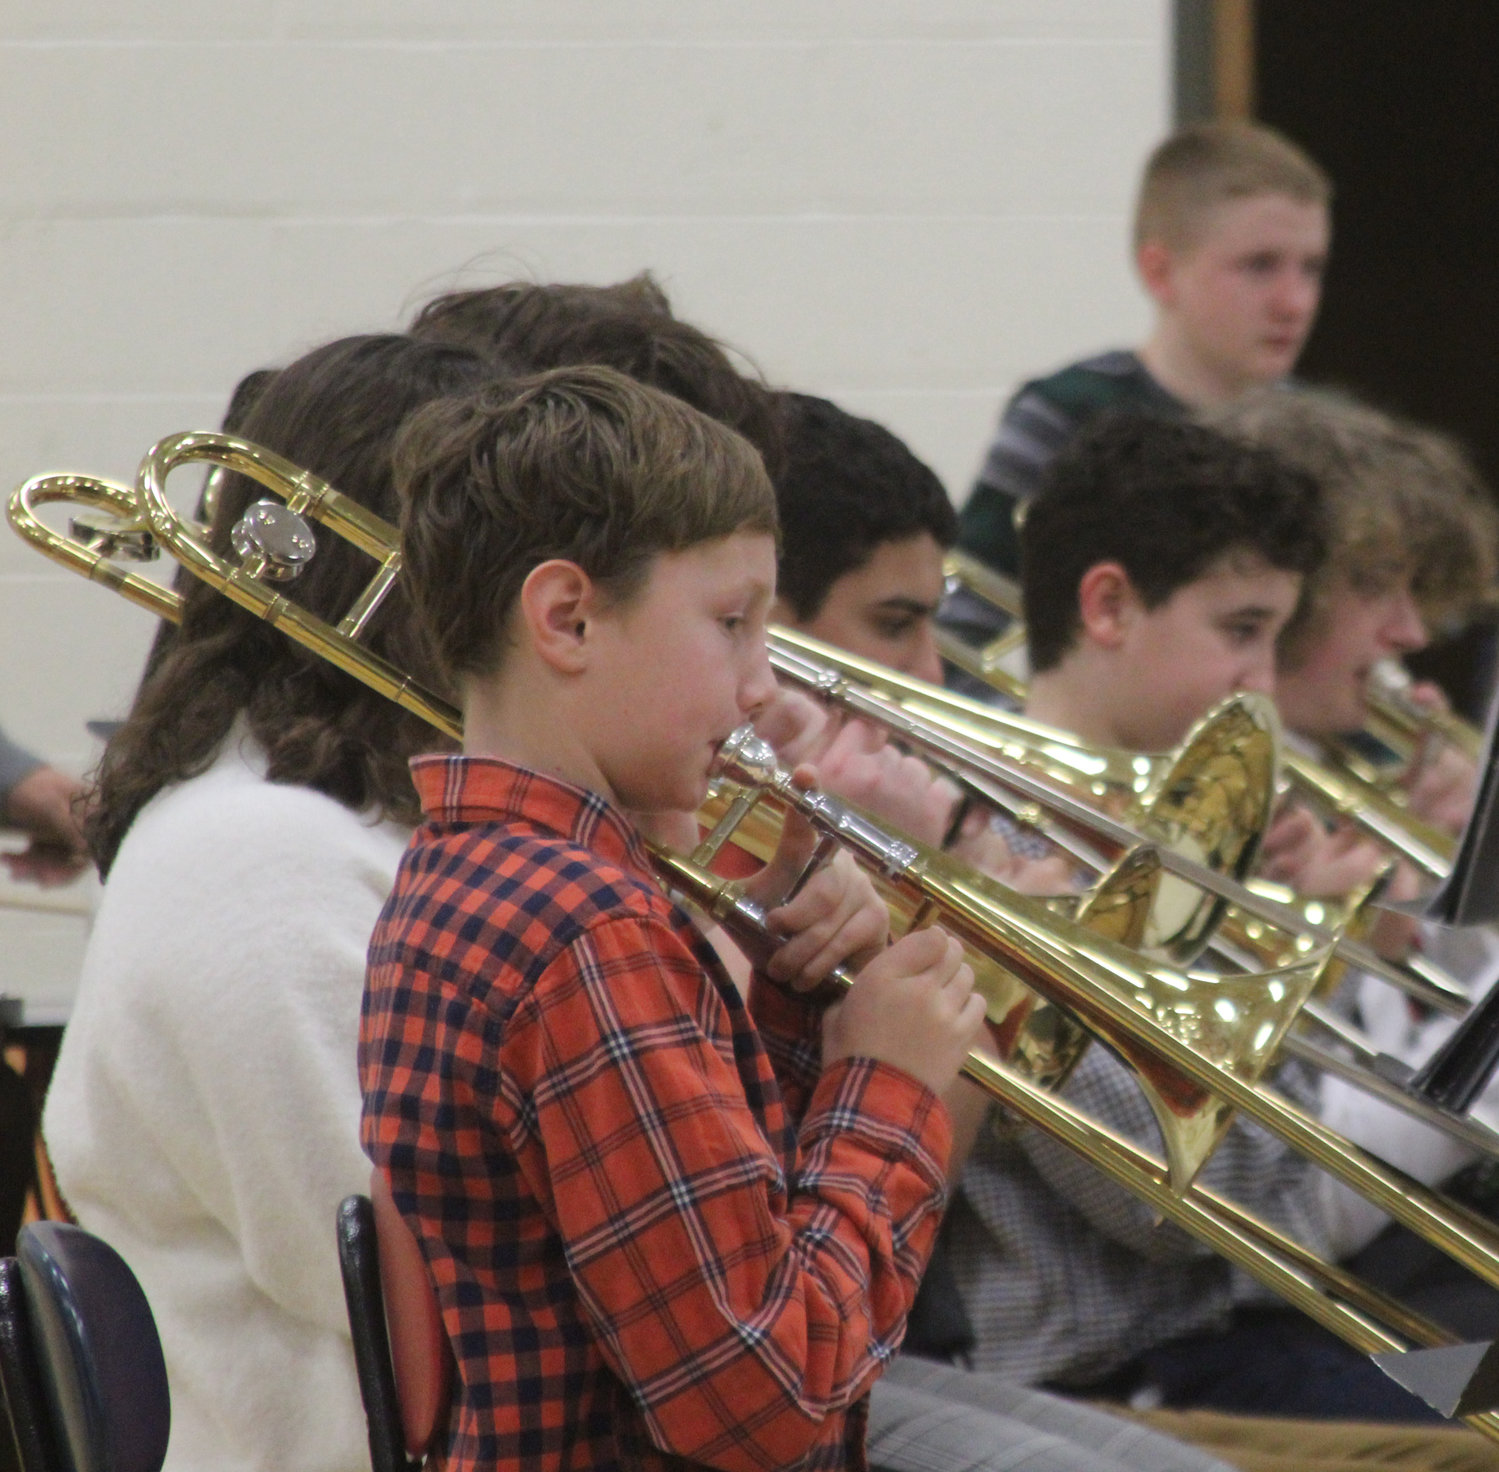 The Mid-Prairie Middle School seventh- and eighth-grade band performs at their holiday concert on Dec. 12.